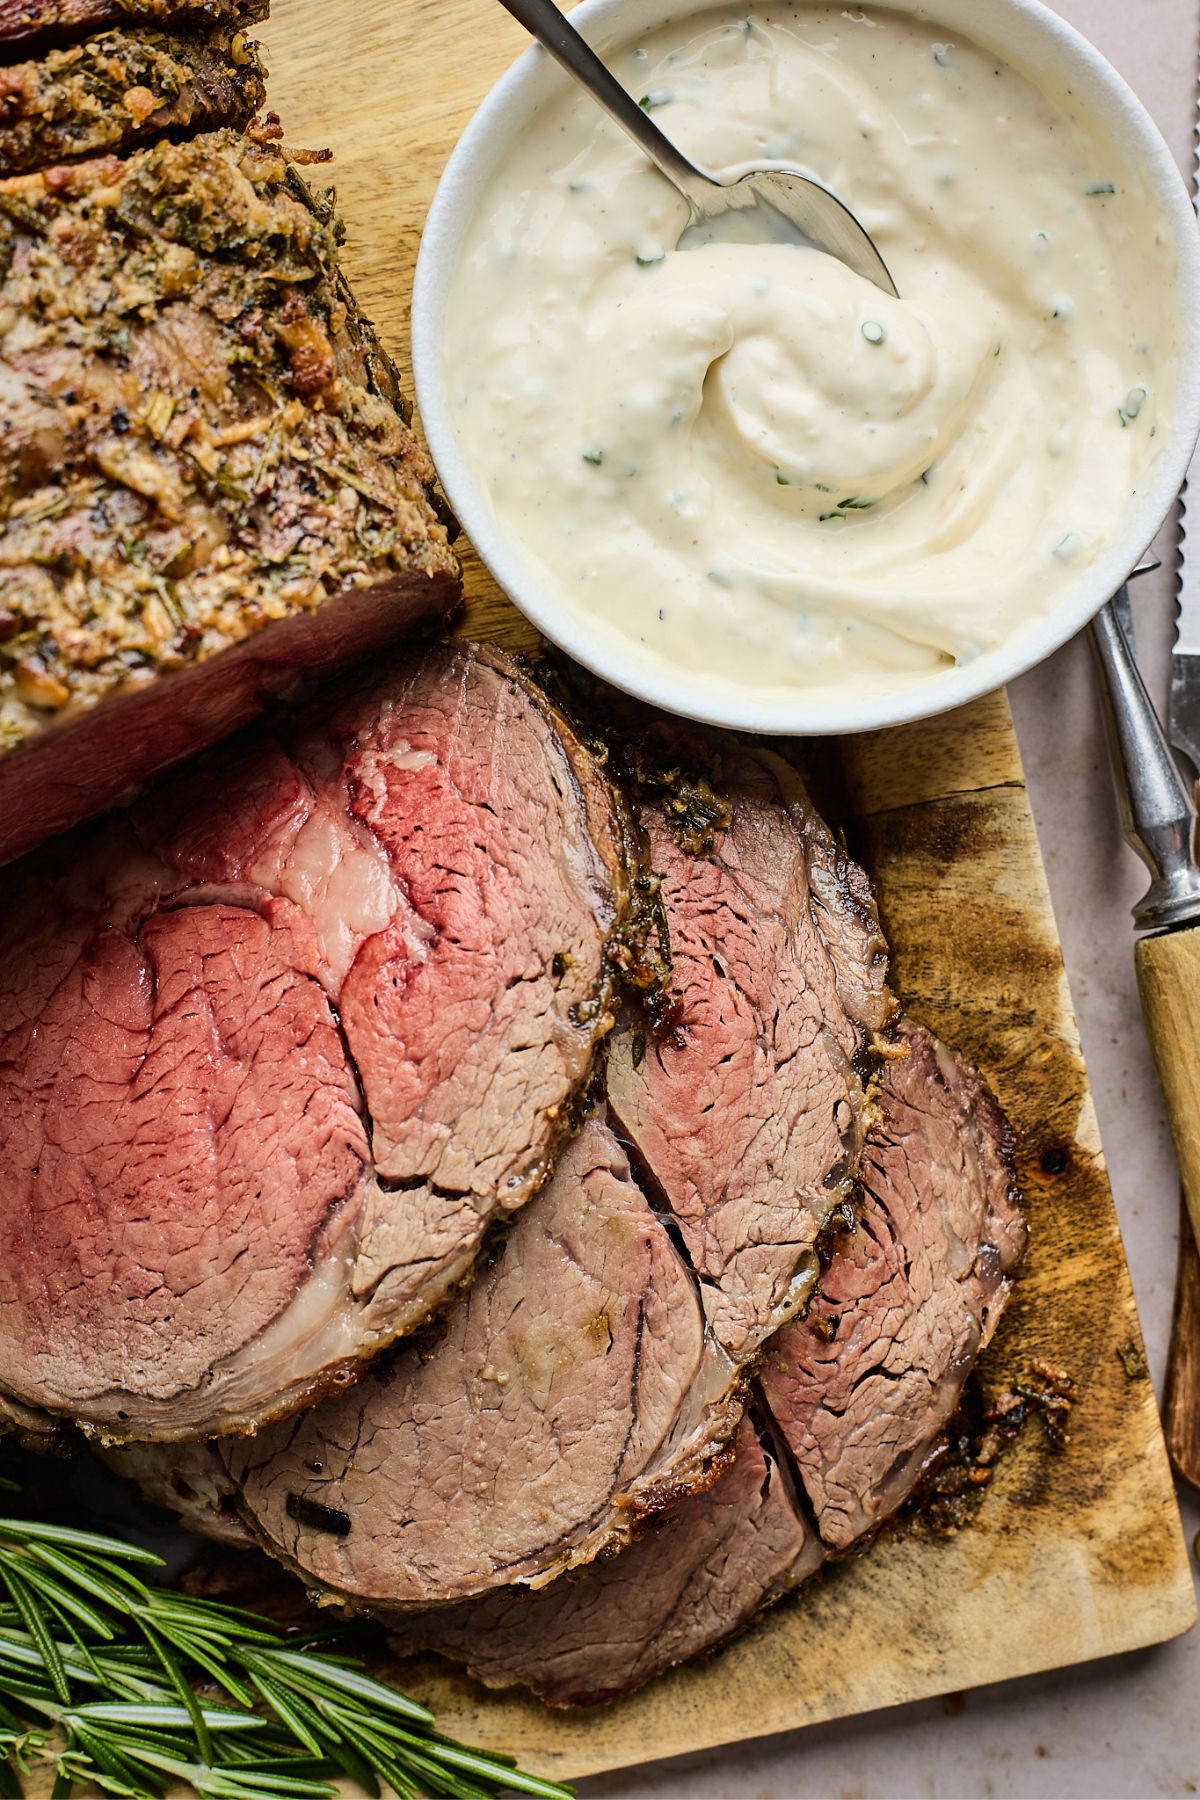 Horseradish sauce recipe served in a bowl next to slices of prime rib in a cutboard